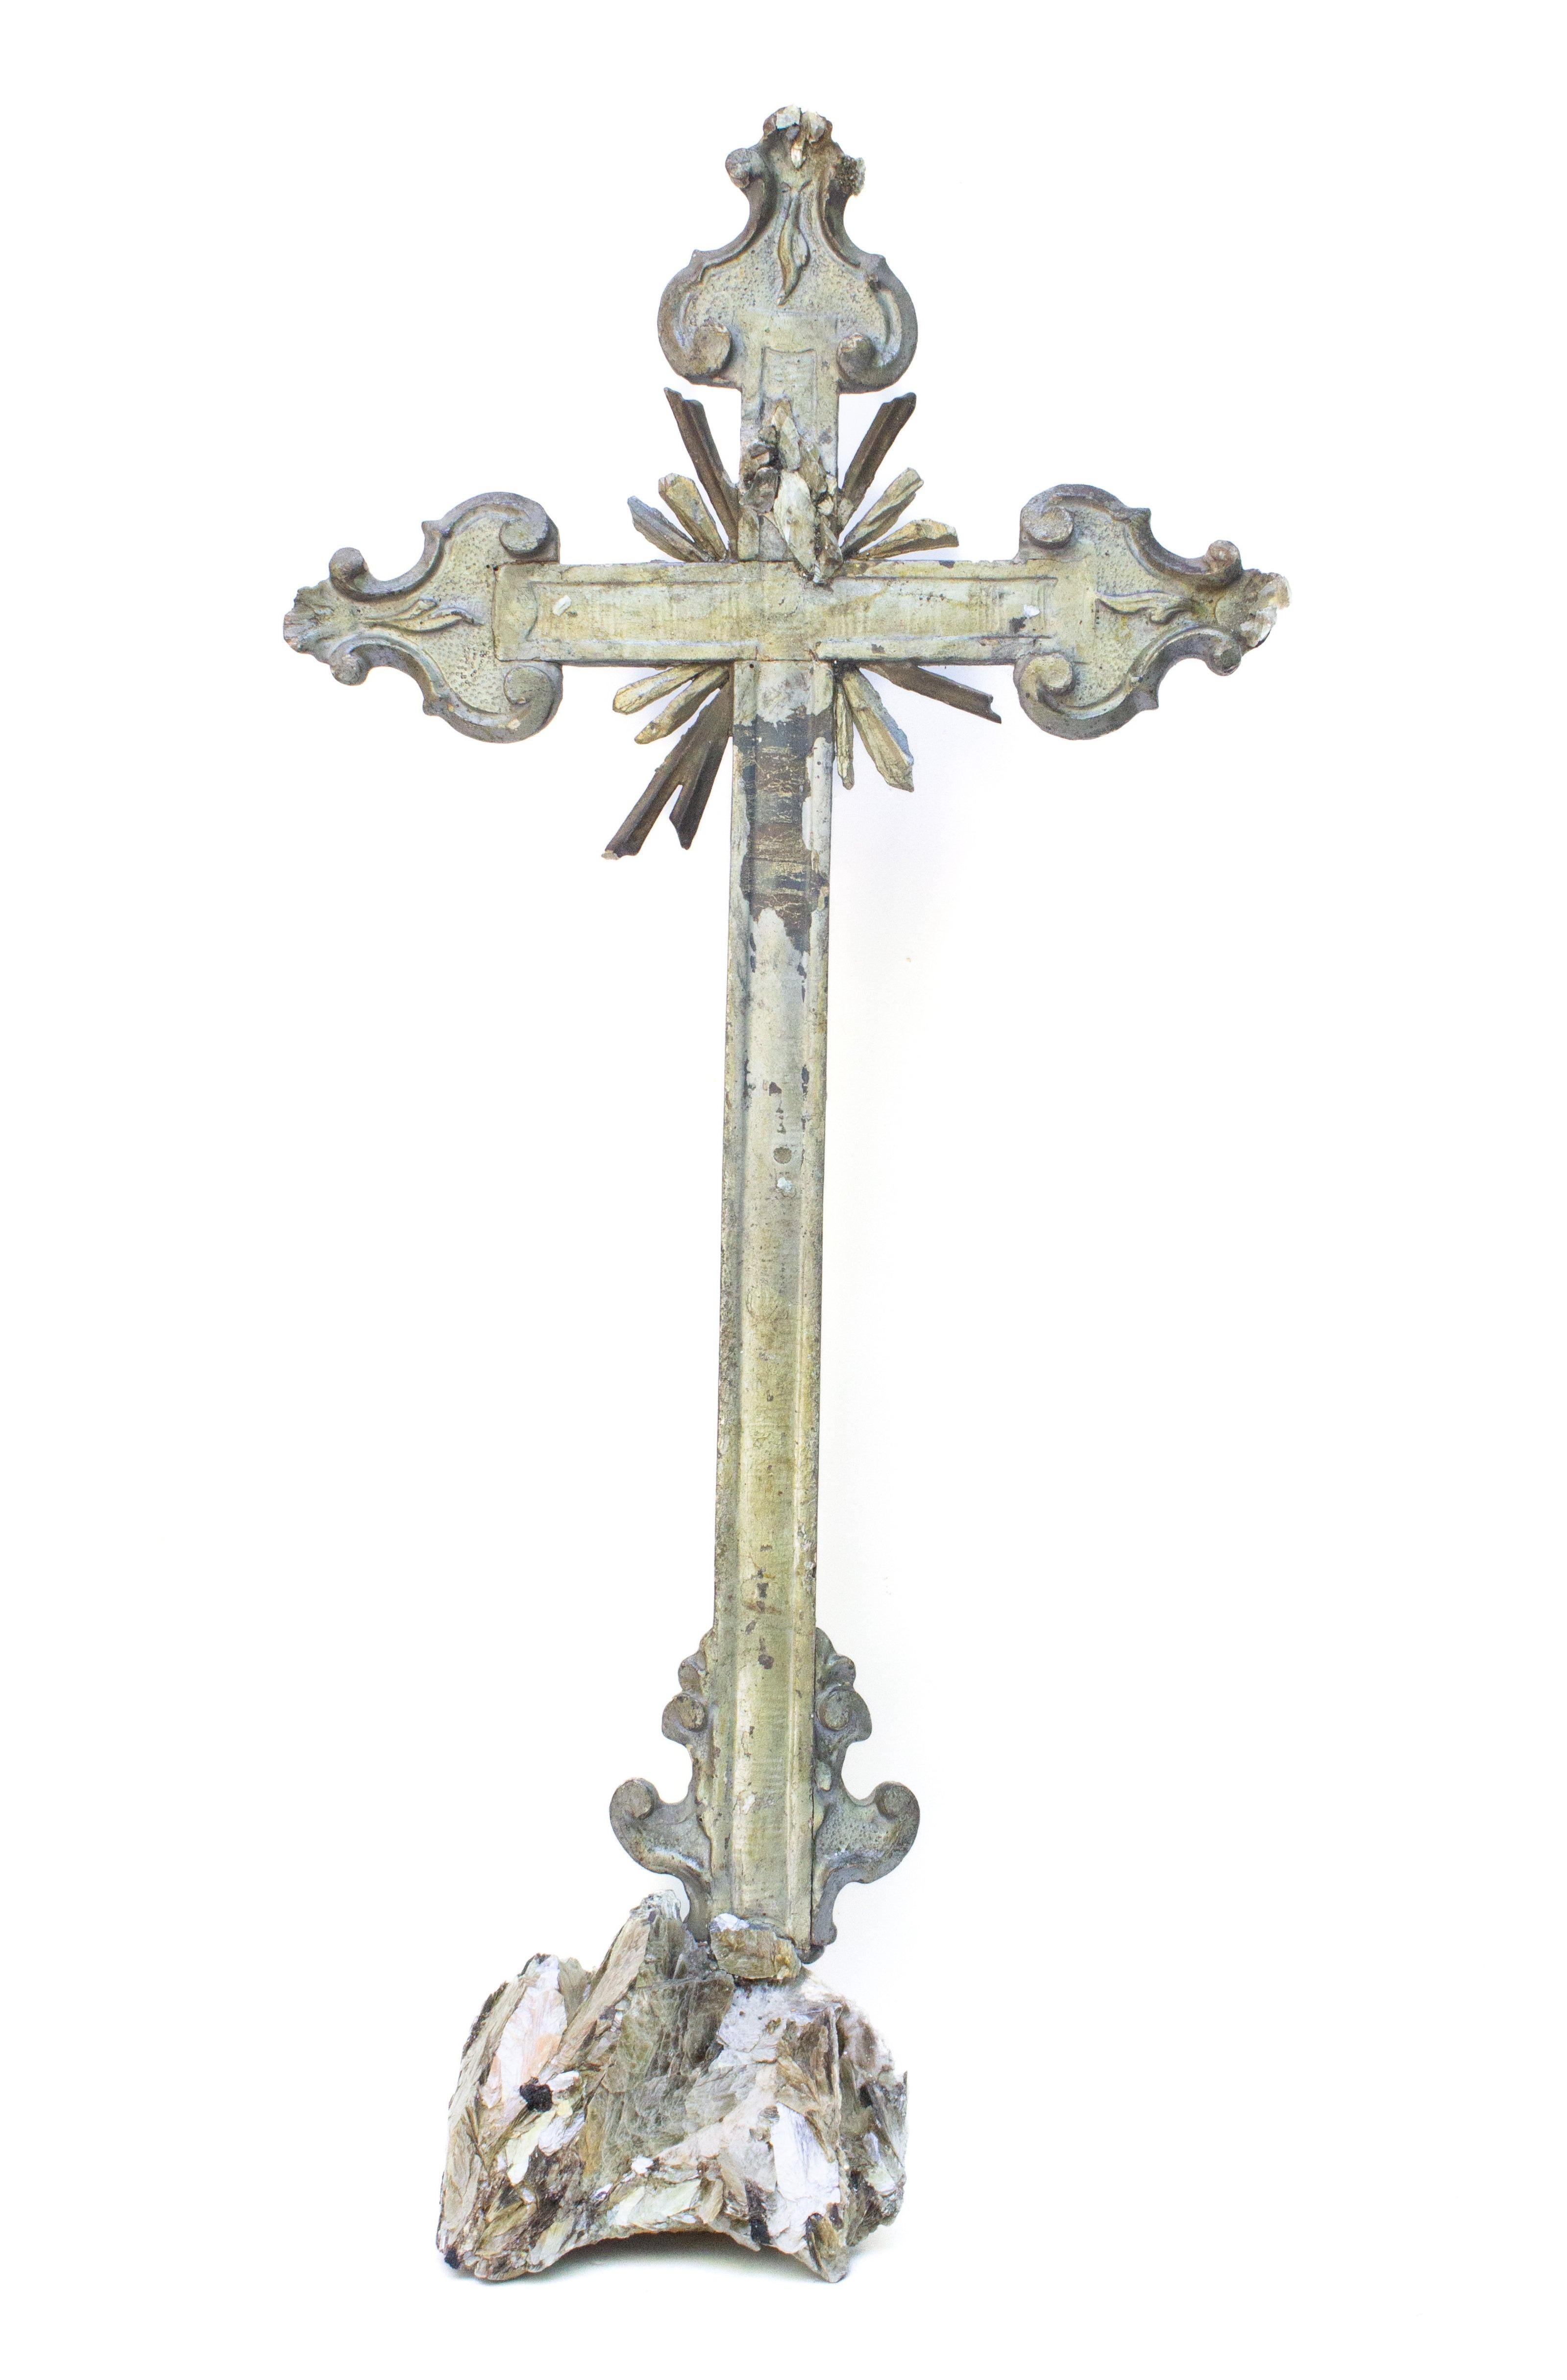 18th century Italian sliver leaf and mecca cross adorned with gold and silver plated crystal points and mica mounted on a mica and tourmaline in calcite matrix base. The crucifix originally came from a church in Tuscany. The gold and silver plated